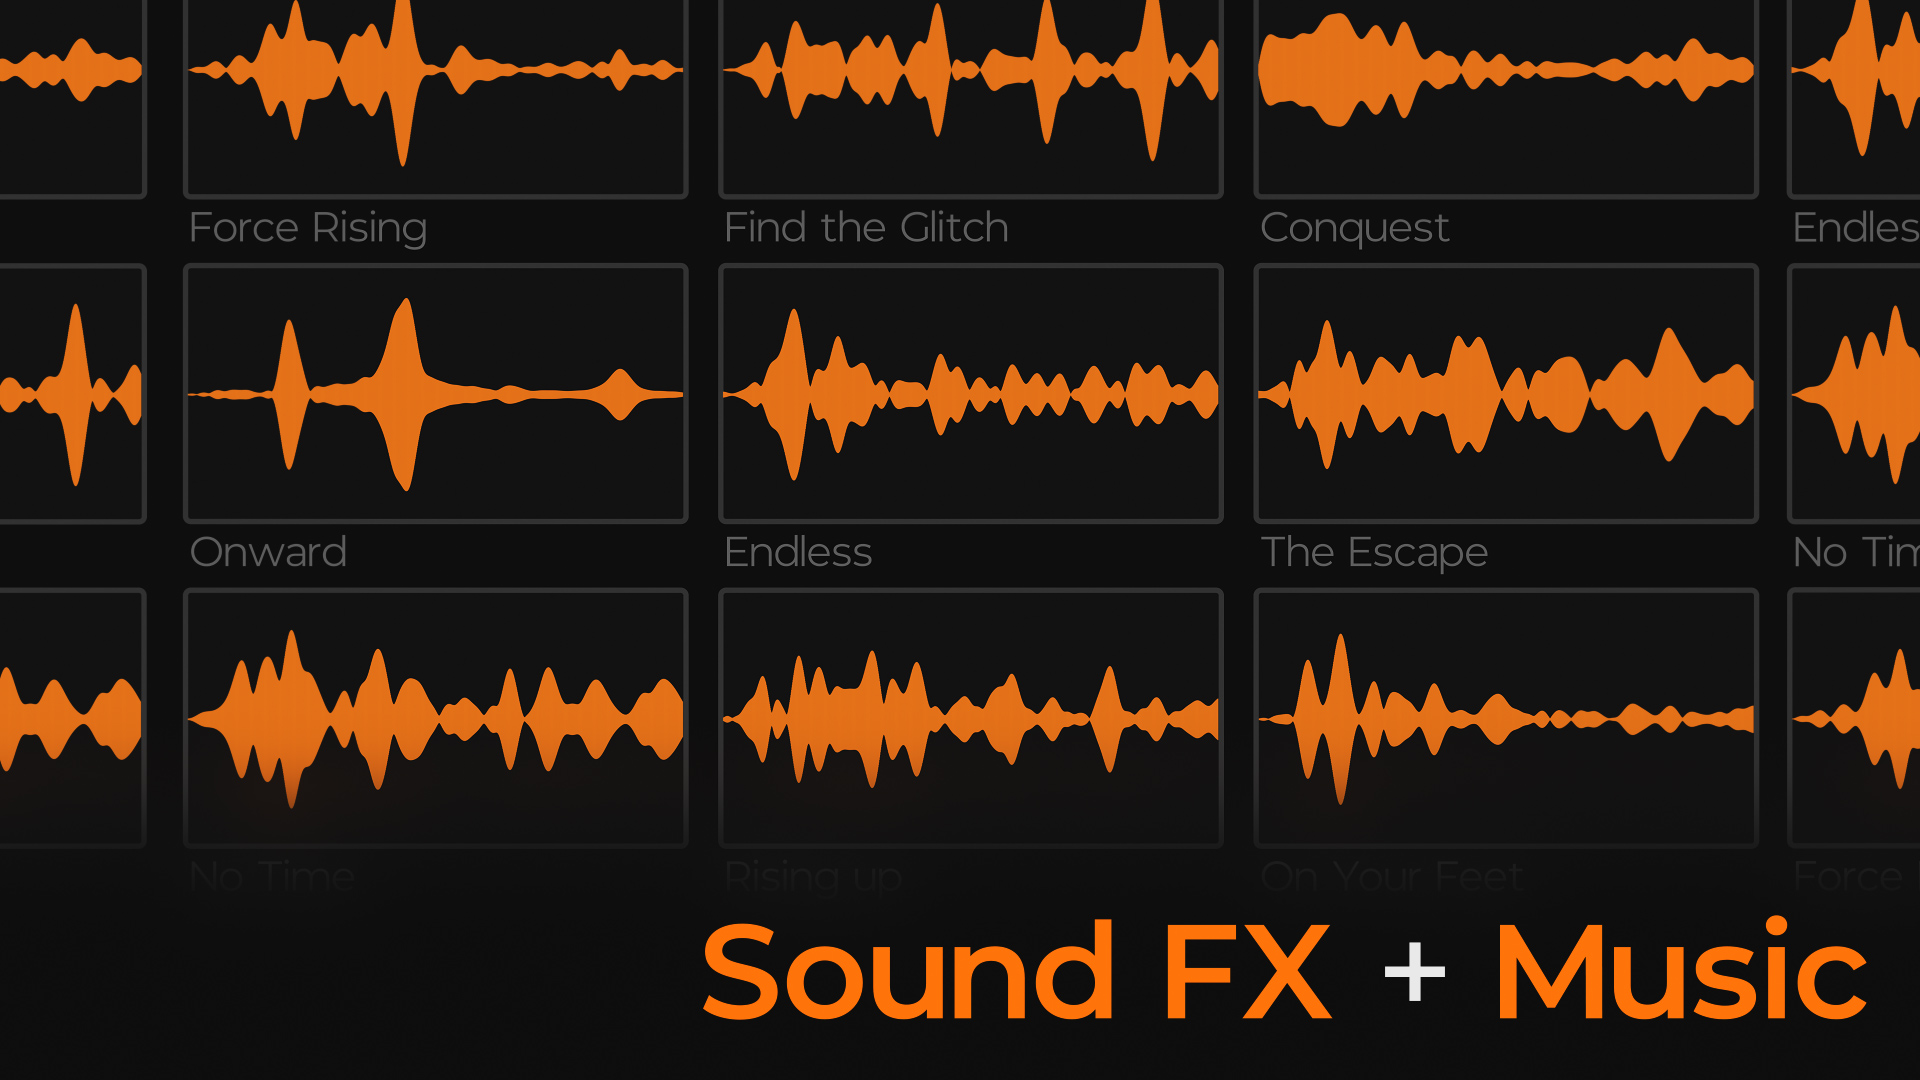 sound effects free